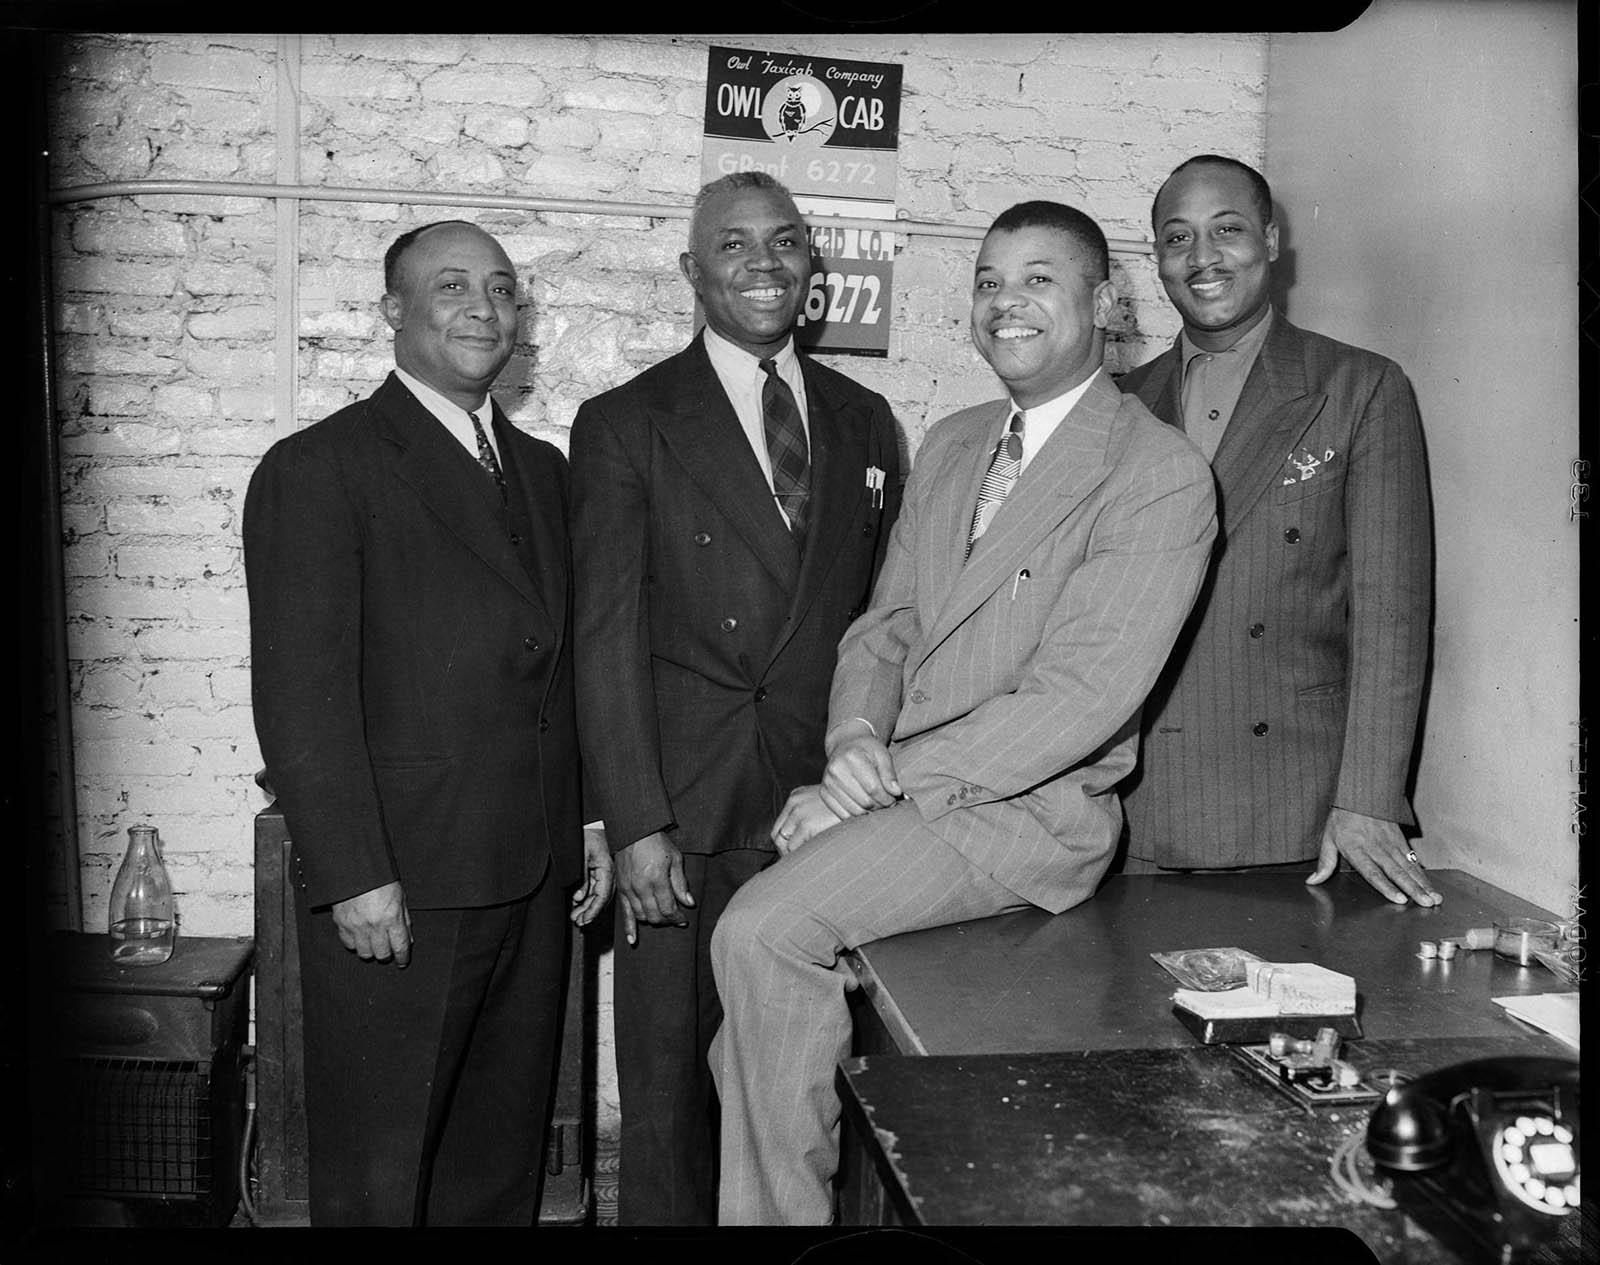 Photograph by Charles Teenie Harris of four men who work for the Owl Taxicab Company